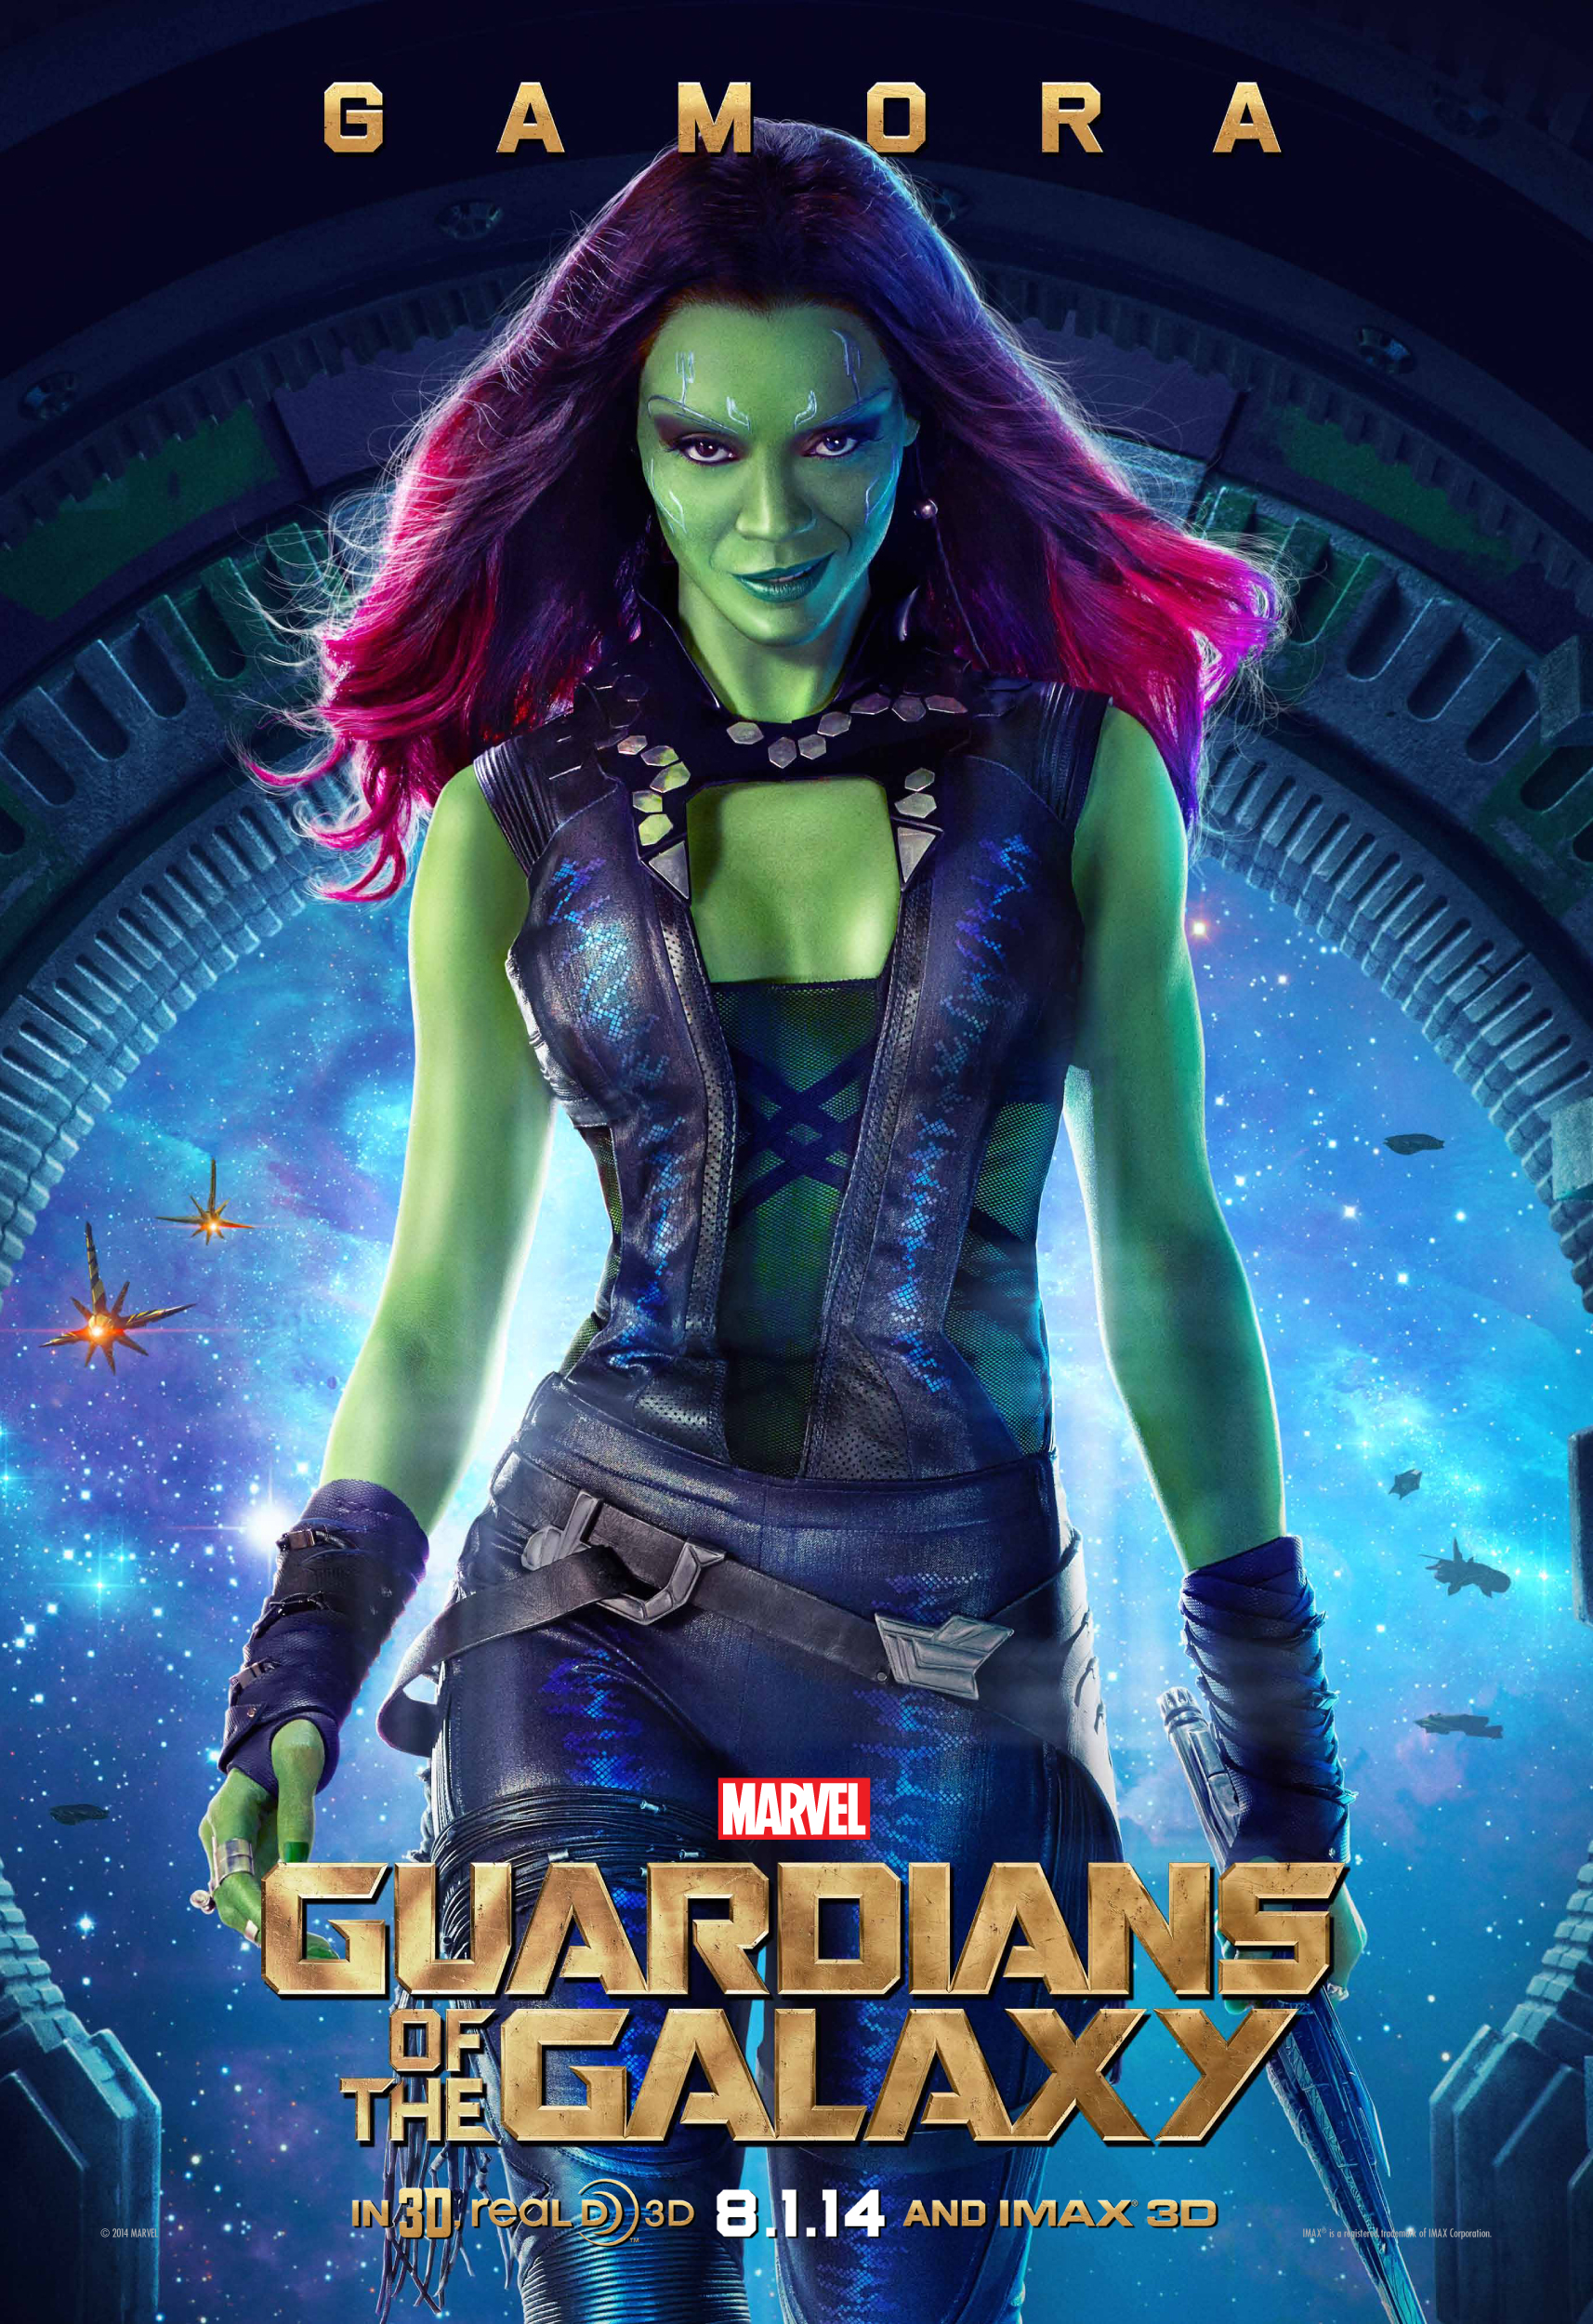 MARVEL'S GUARDIANS OF THE GALAXY Character Posters  #GuardiansOfTheGalaxy